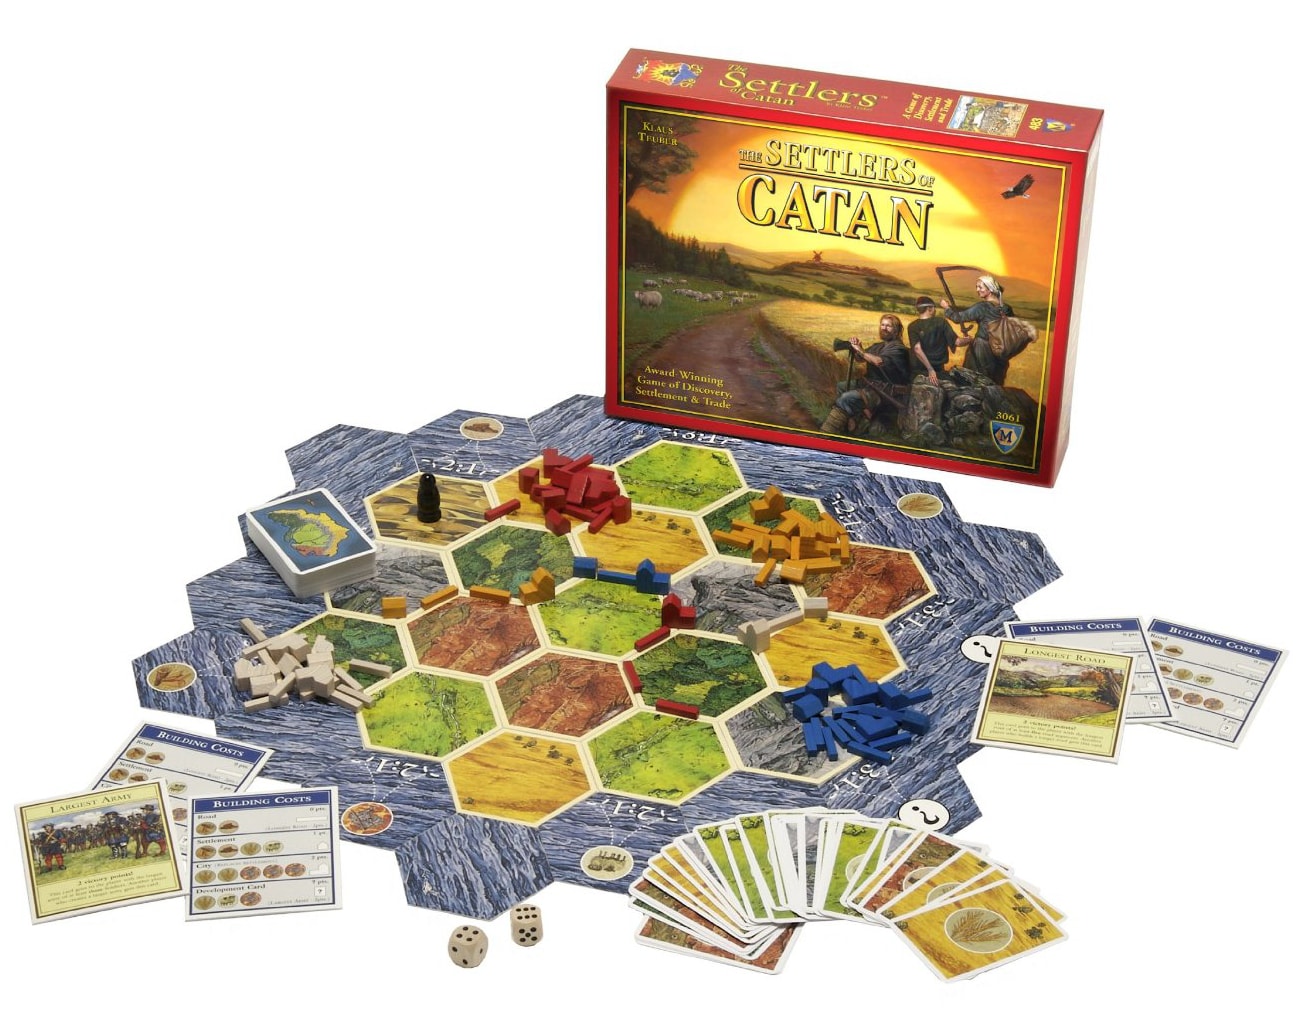 Settlers of Catan box and board with cards on display